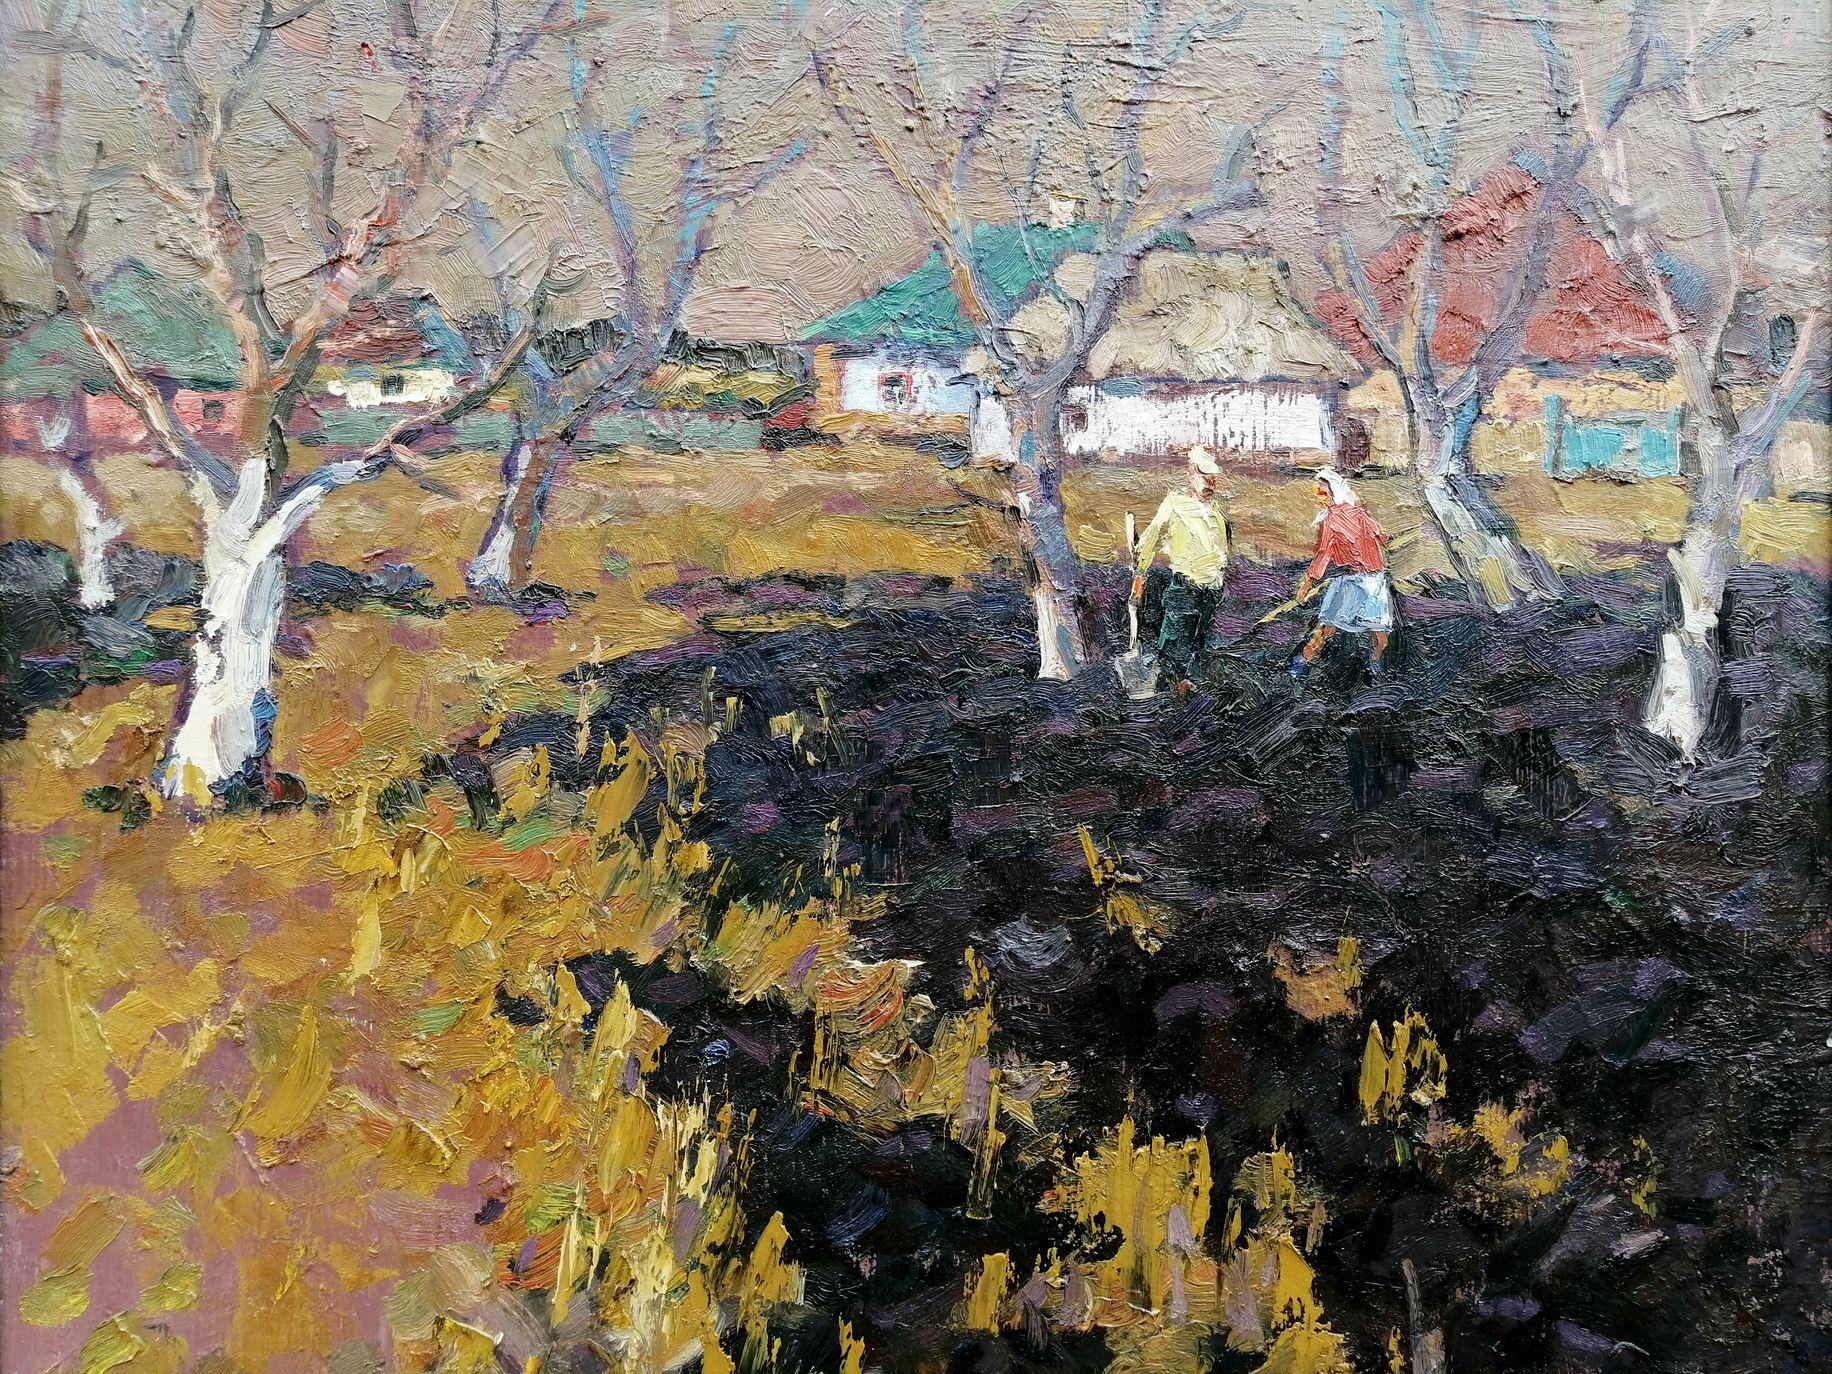 Early Spring, Impressionism, Landscape, Original oil Painting, Ready to Hang - Brown Landscape Painting by Alex Kalenyuk  